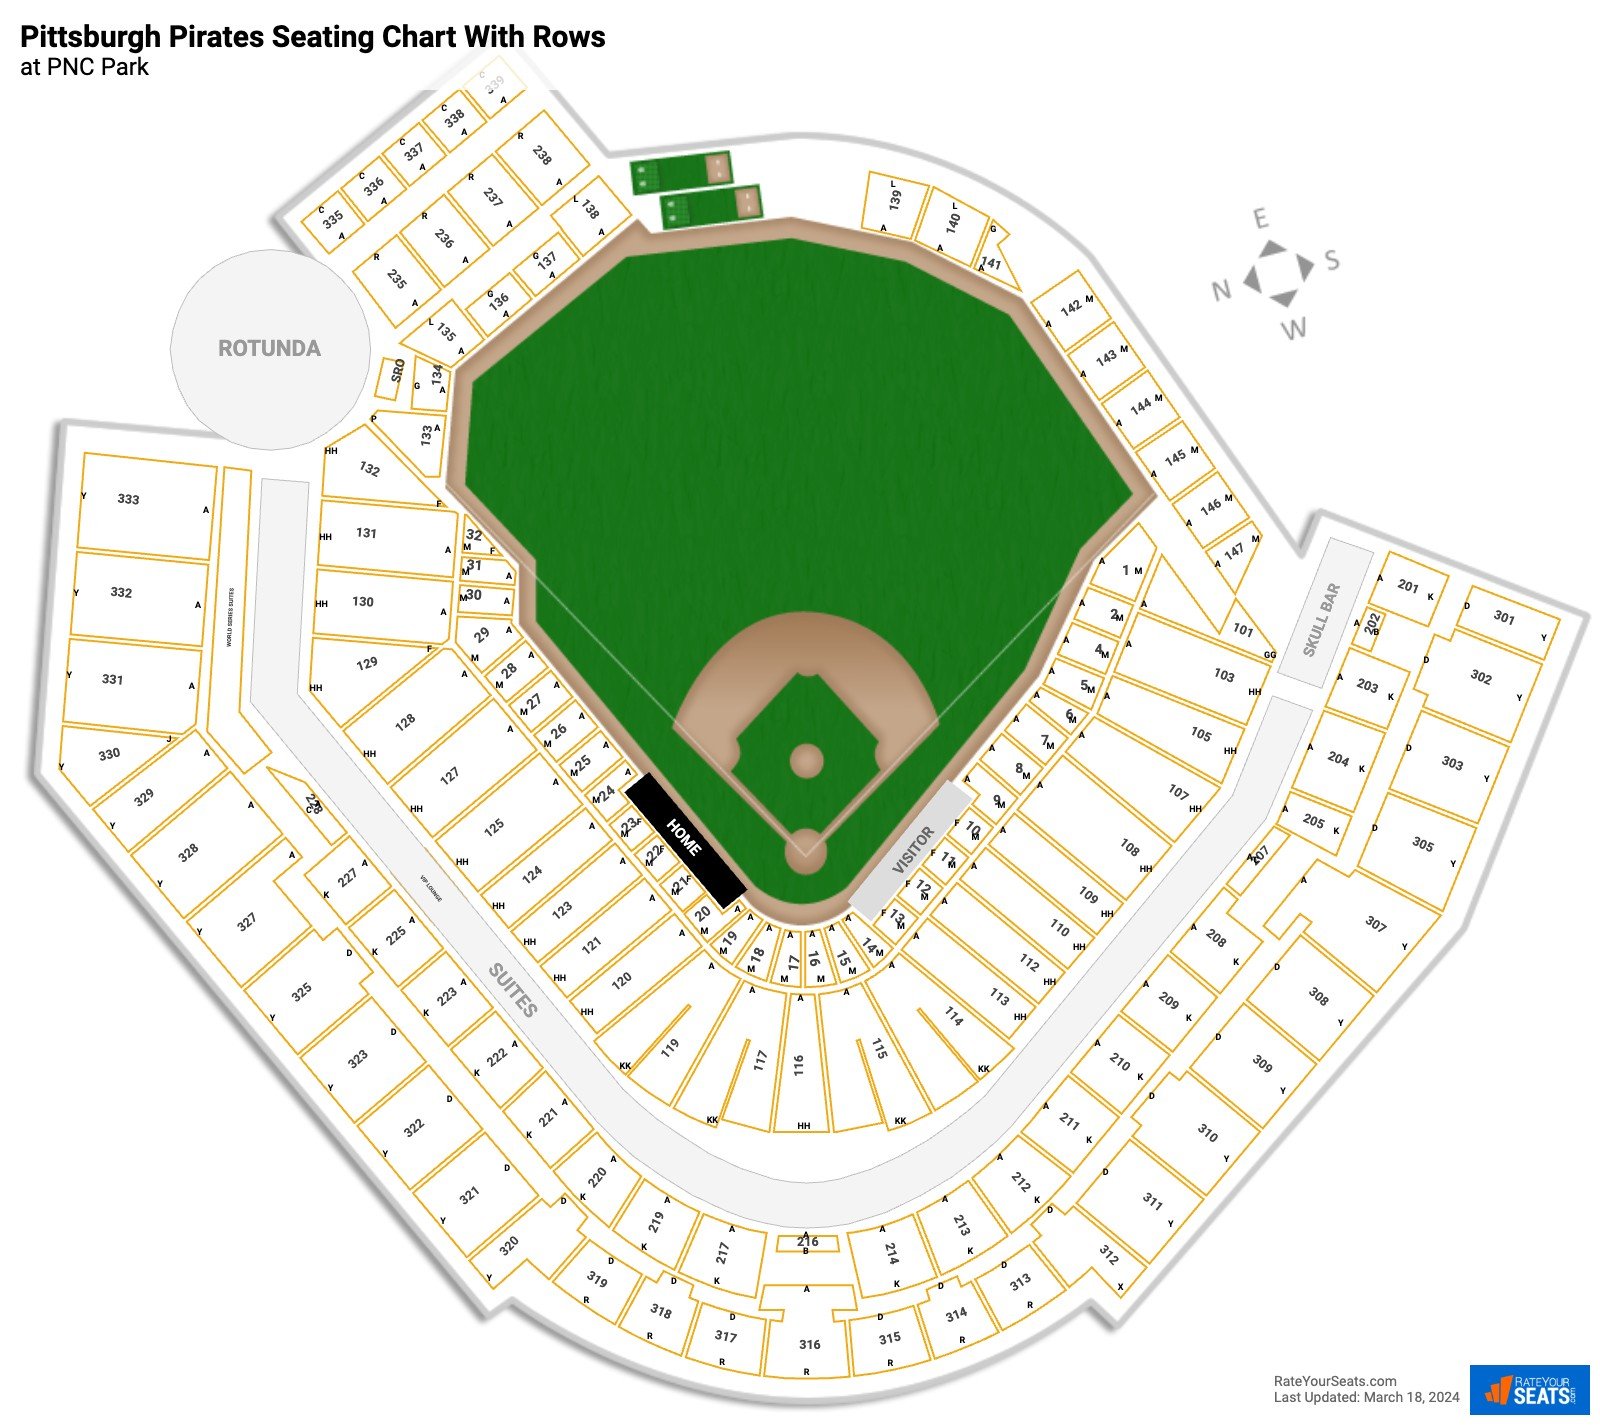 PNC Park Seating Chart & Map